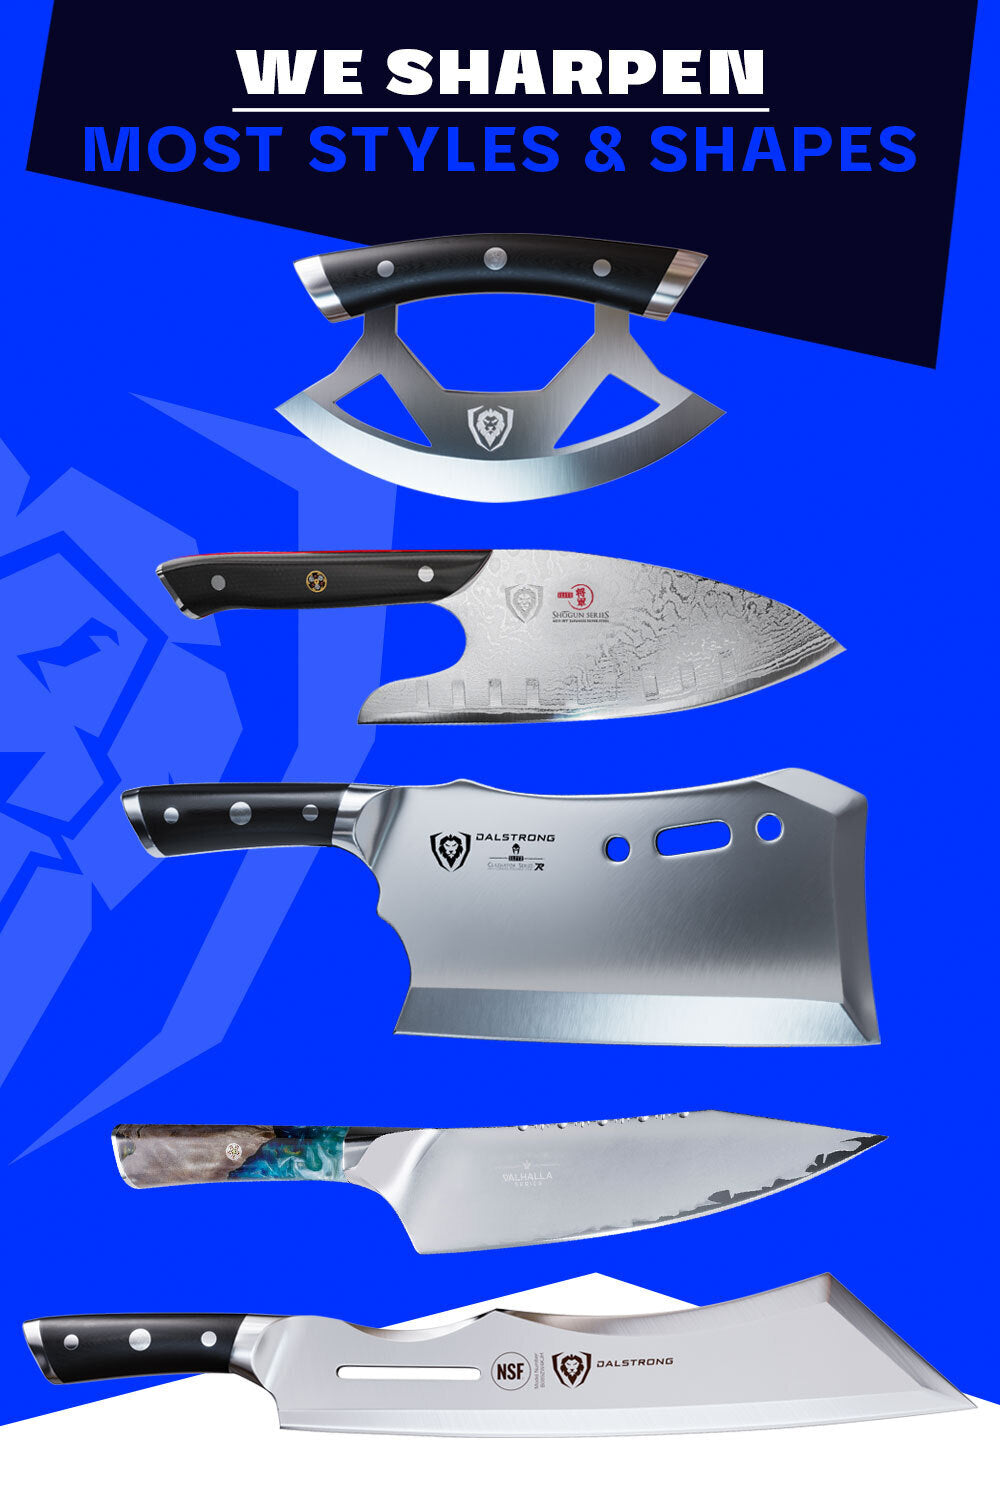 Dalstrong's Knife Sharpening Service can sharpen knives of differetn styles.